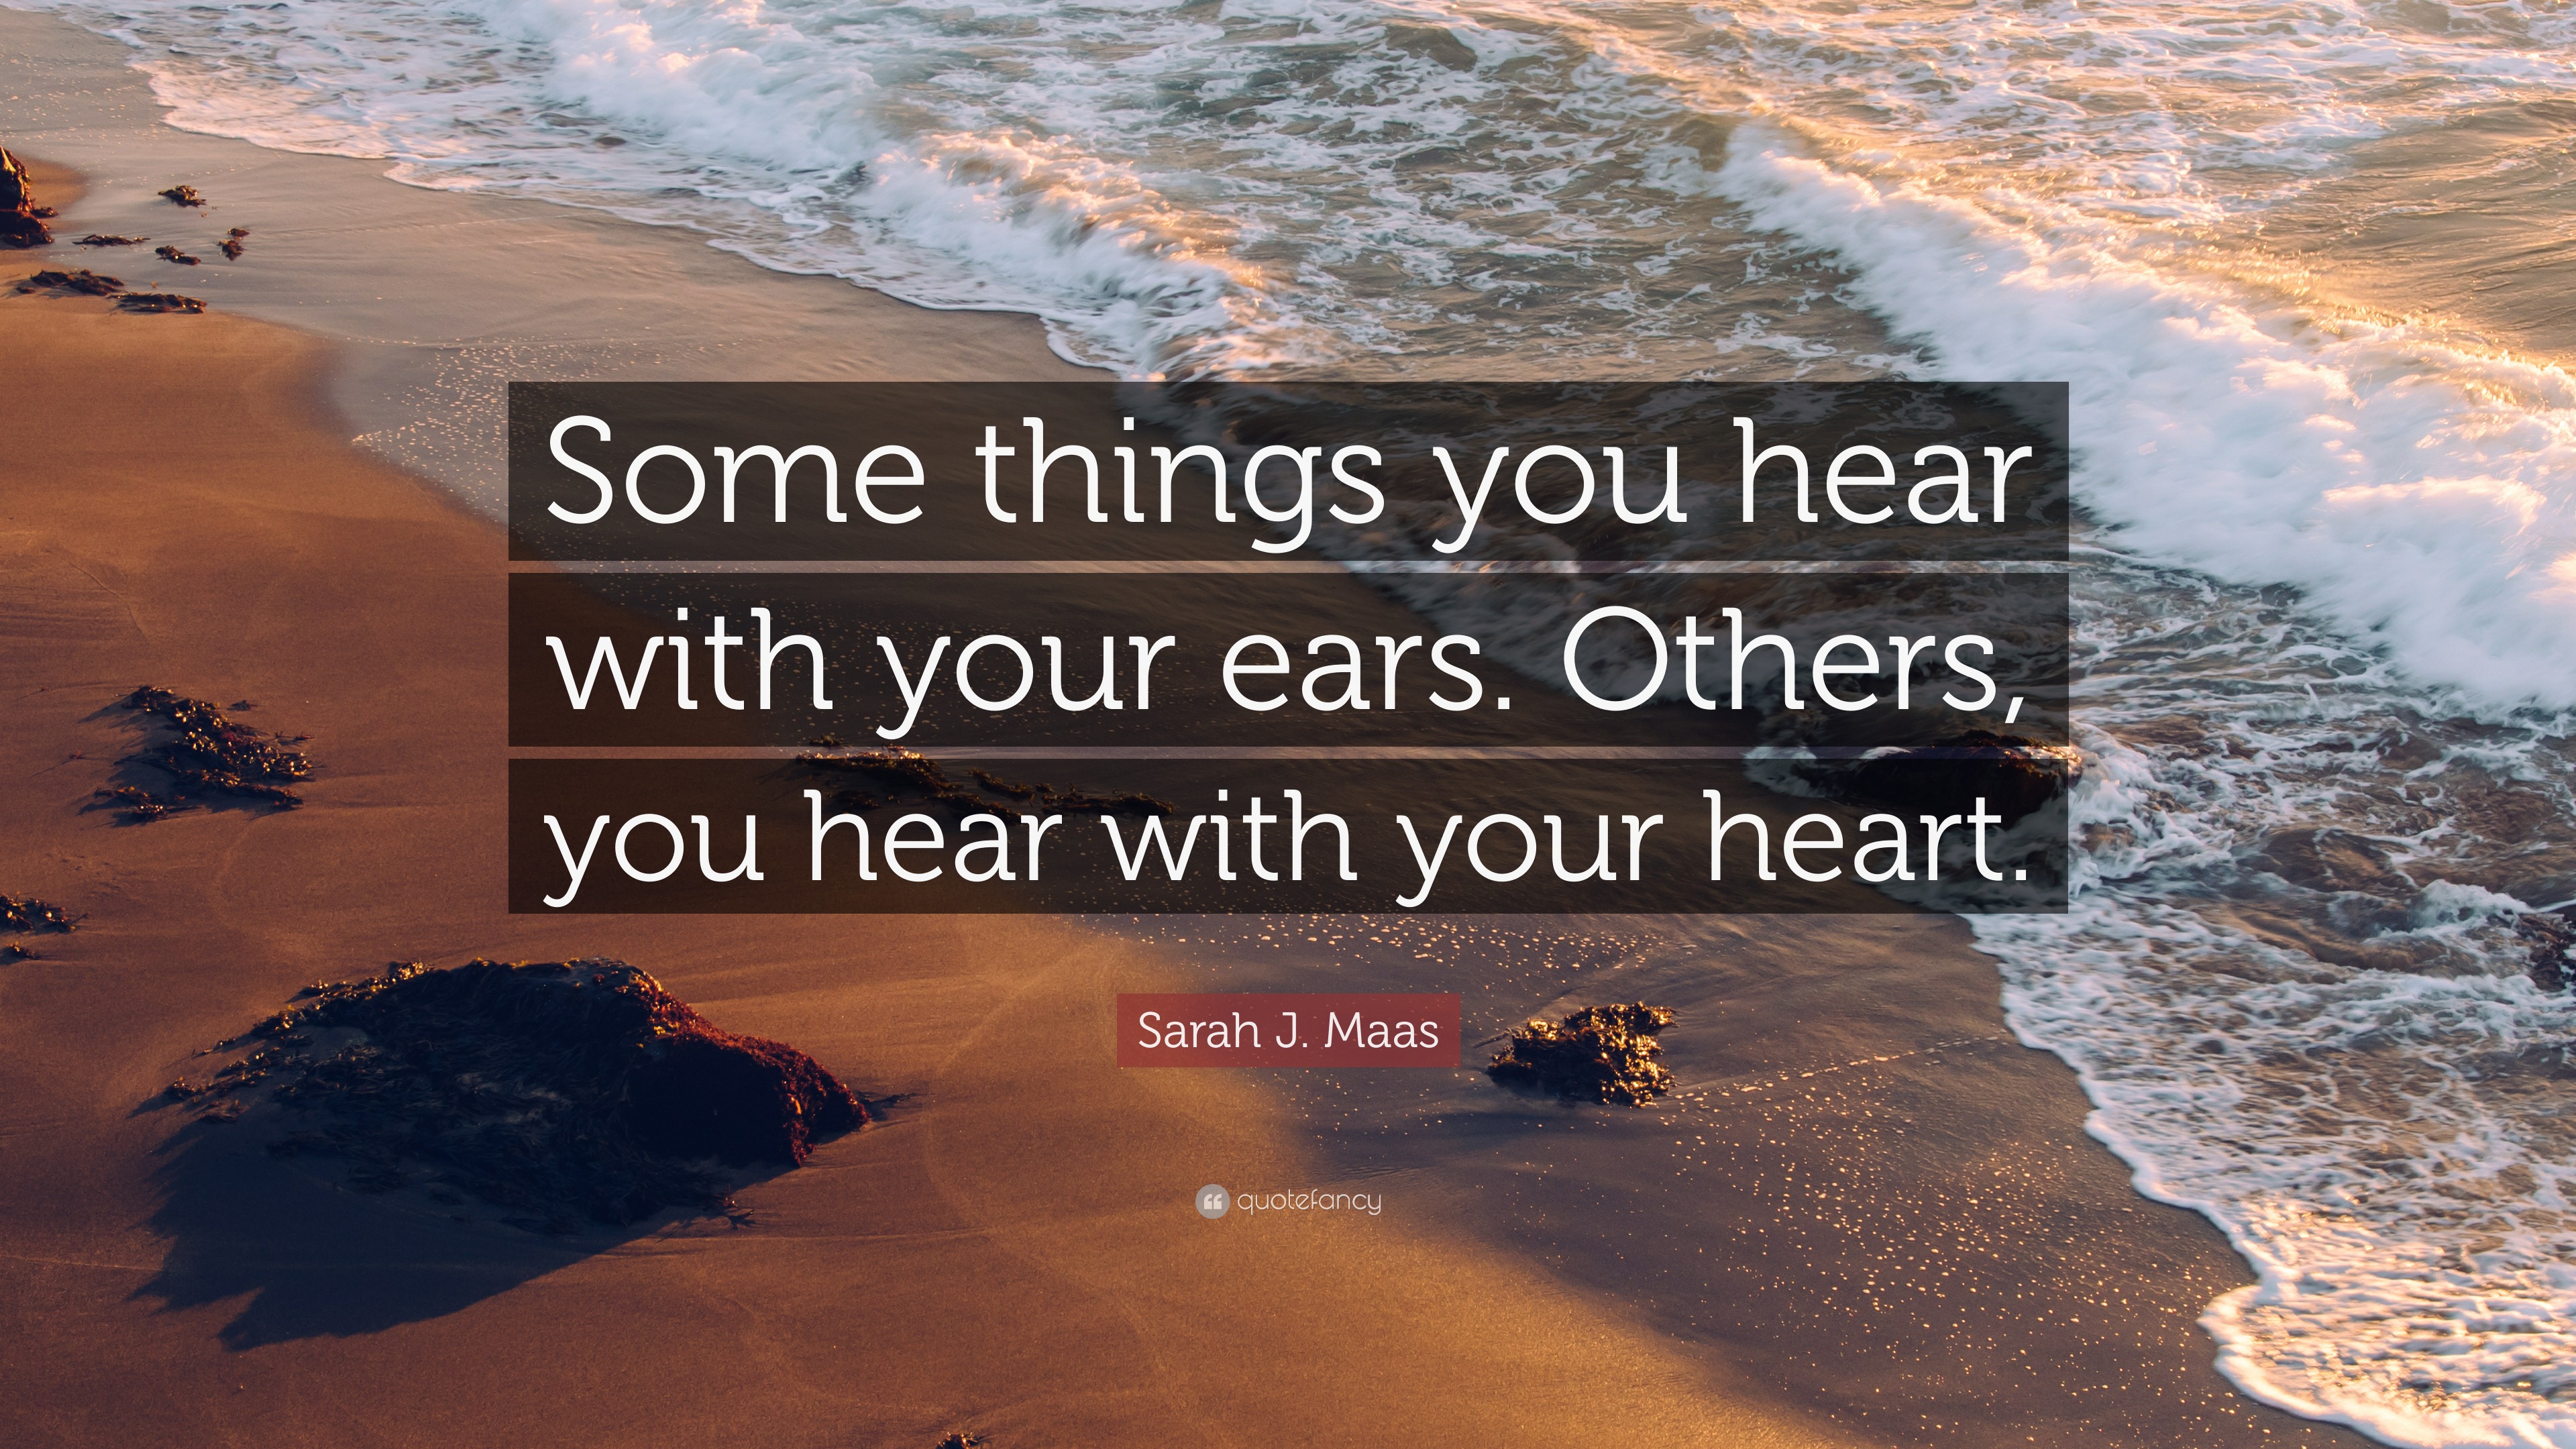 Sarah J Maas Quote “some Things You Hear With Your Ears Others You Hear With Your Heart ”